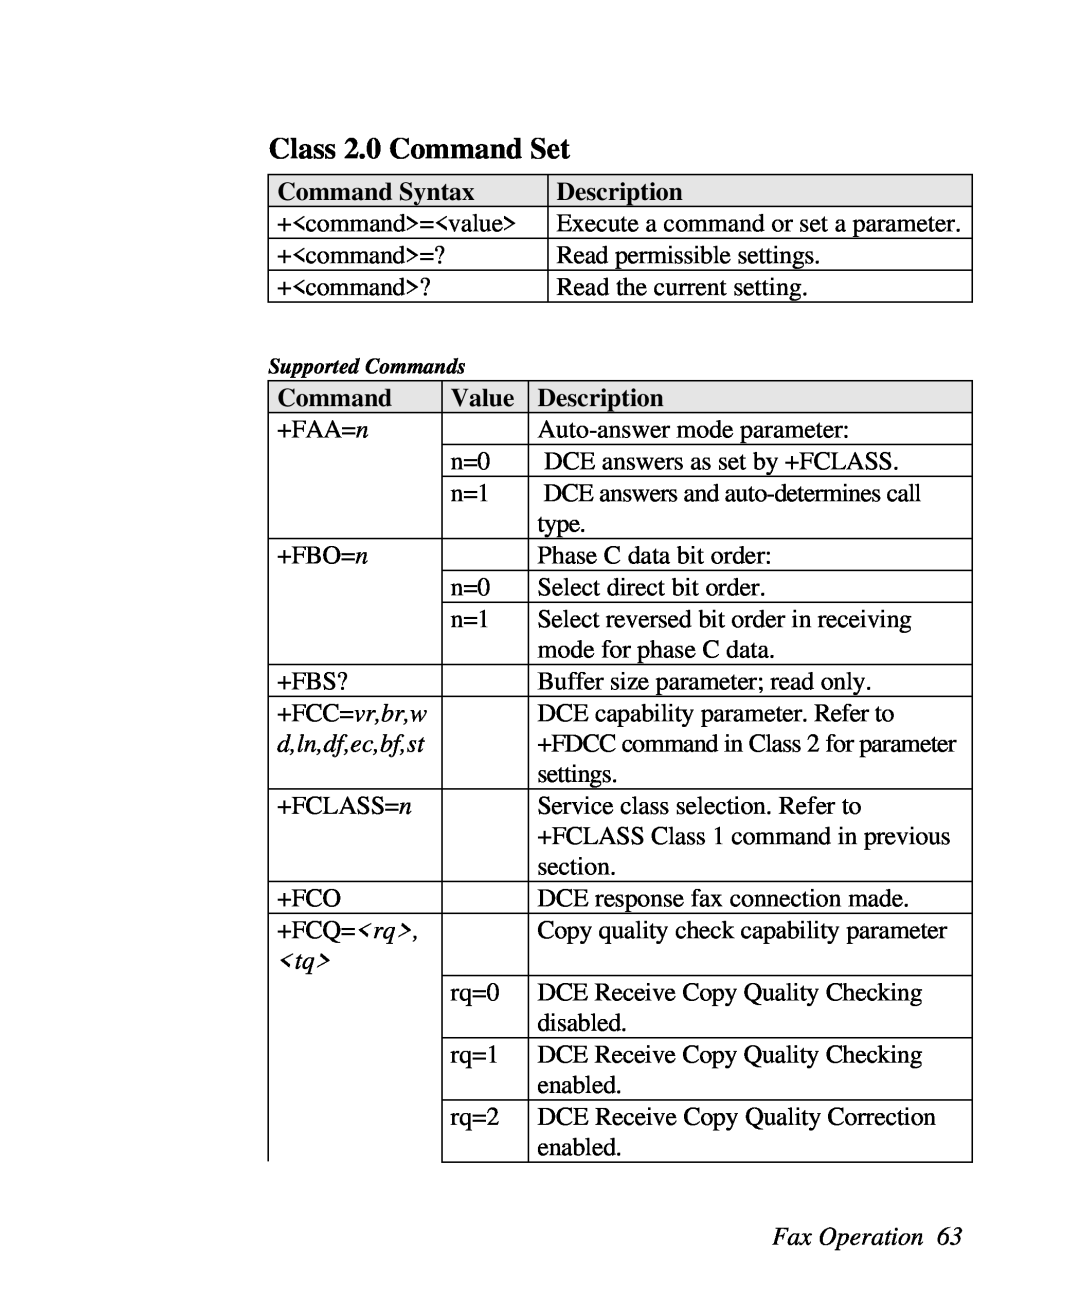 ZyXEL Communications U-336R/RE Class 2.0 Command Set, +FCC=vr,br,w, d,ln,df,ec,bf,st, Fax Operation, Supported Commands 